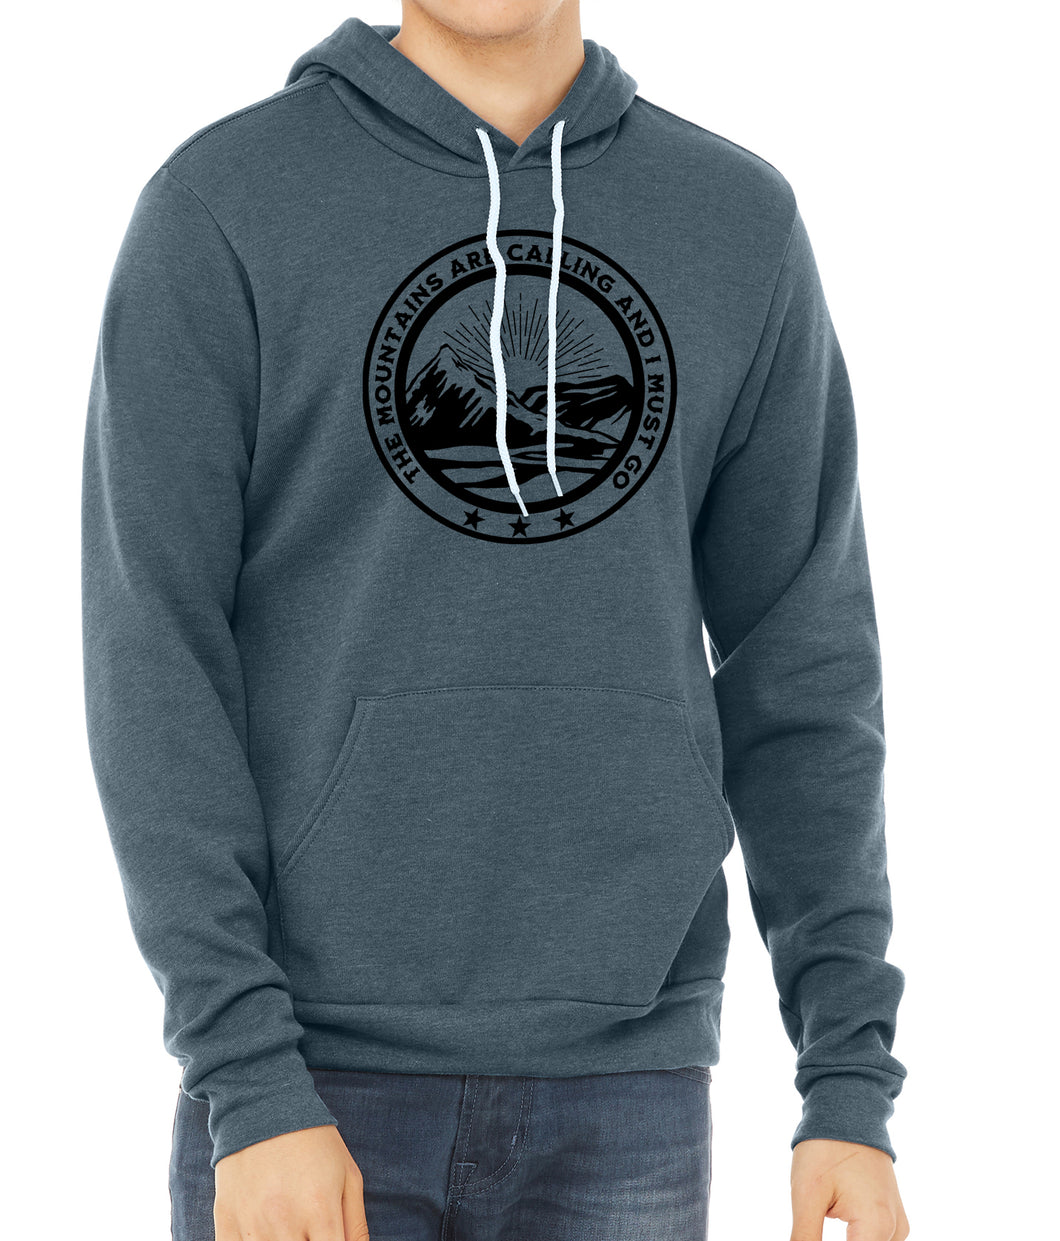 The Mountains Are Calling  Adult Hooded Sweatshirt - Unisex